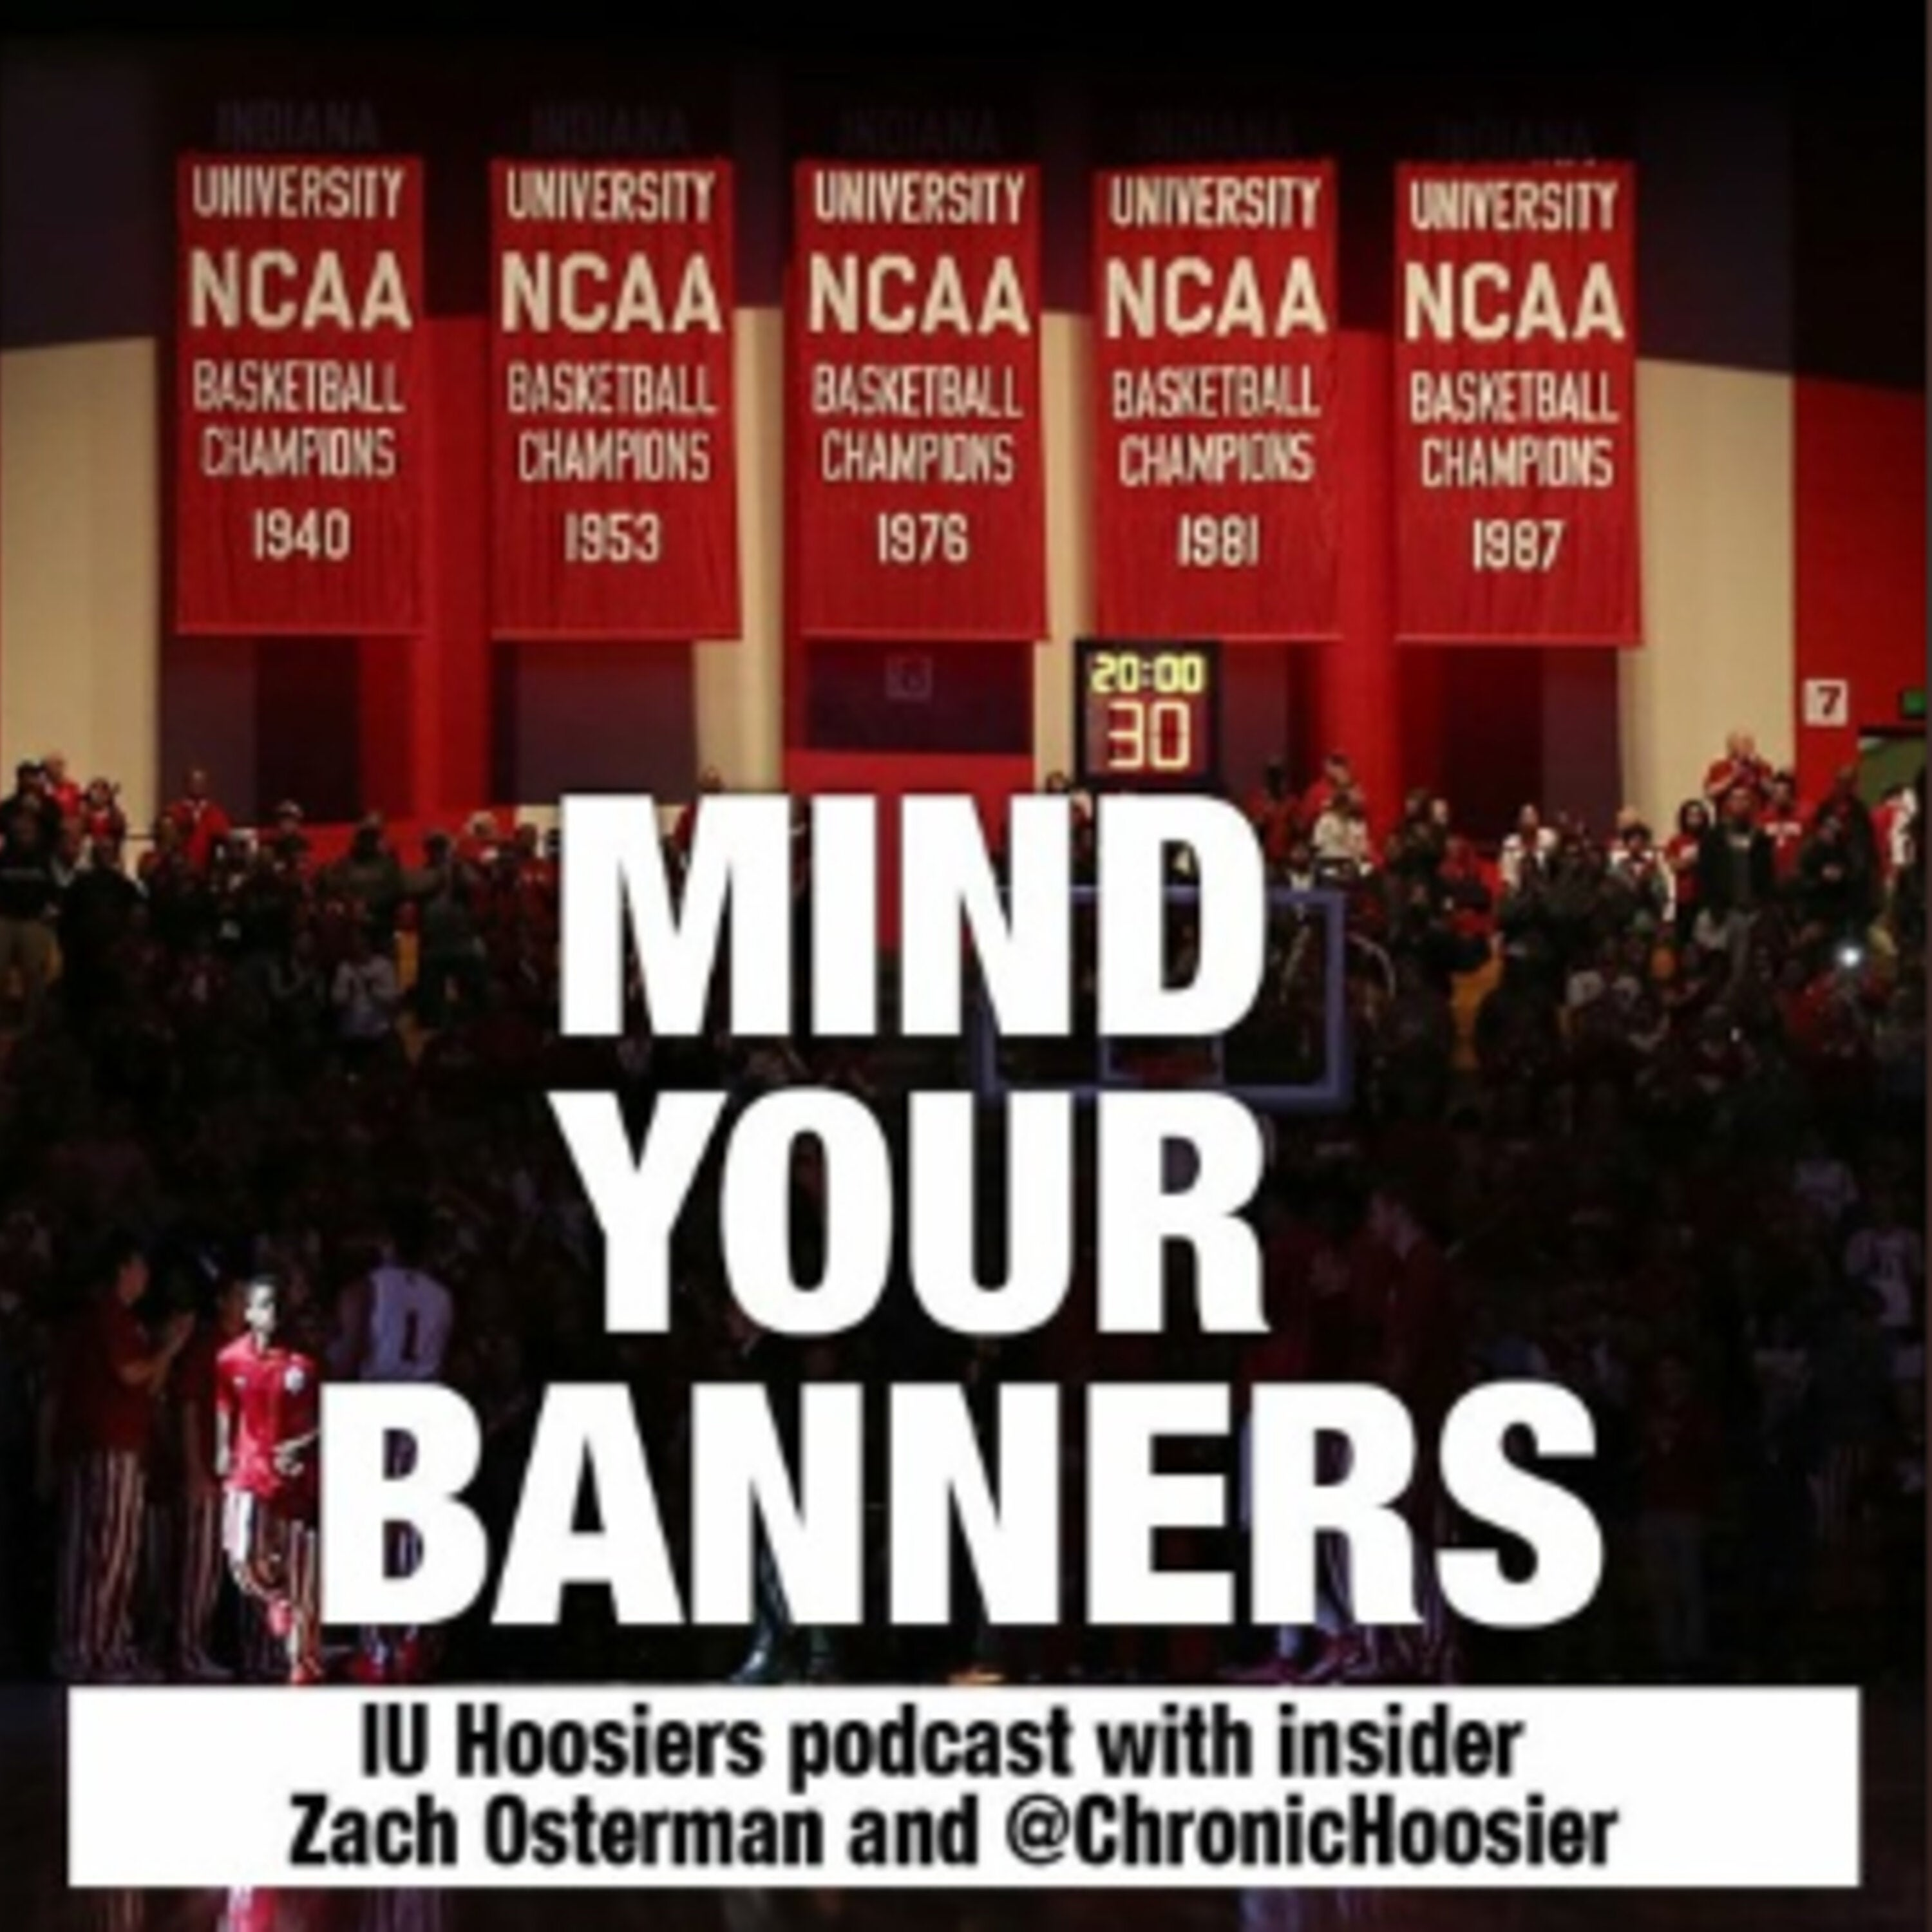 Mind Your Banners: Previewing the Hoosiers’ postseason